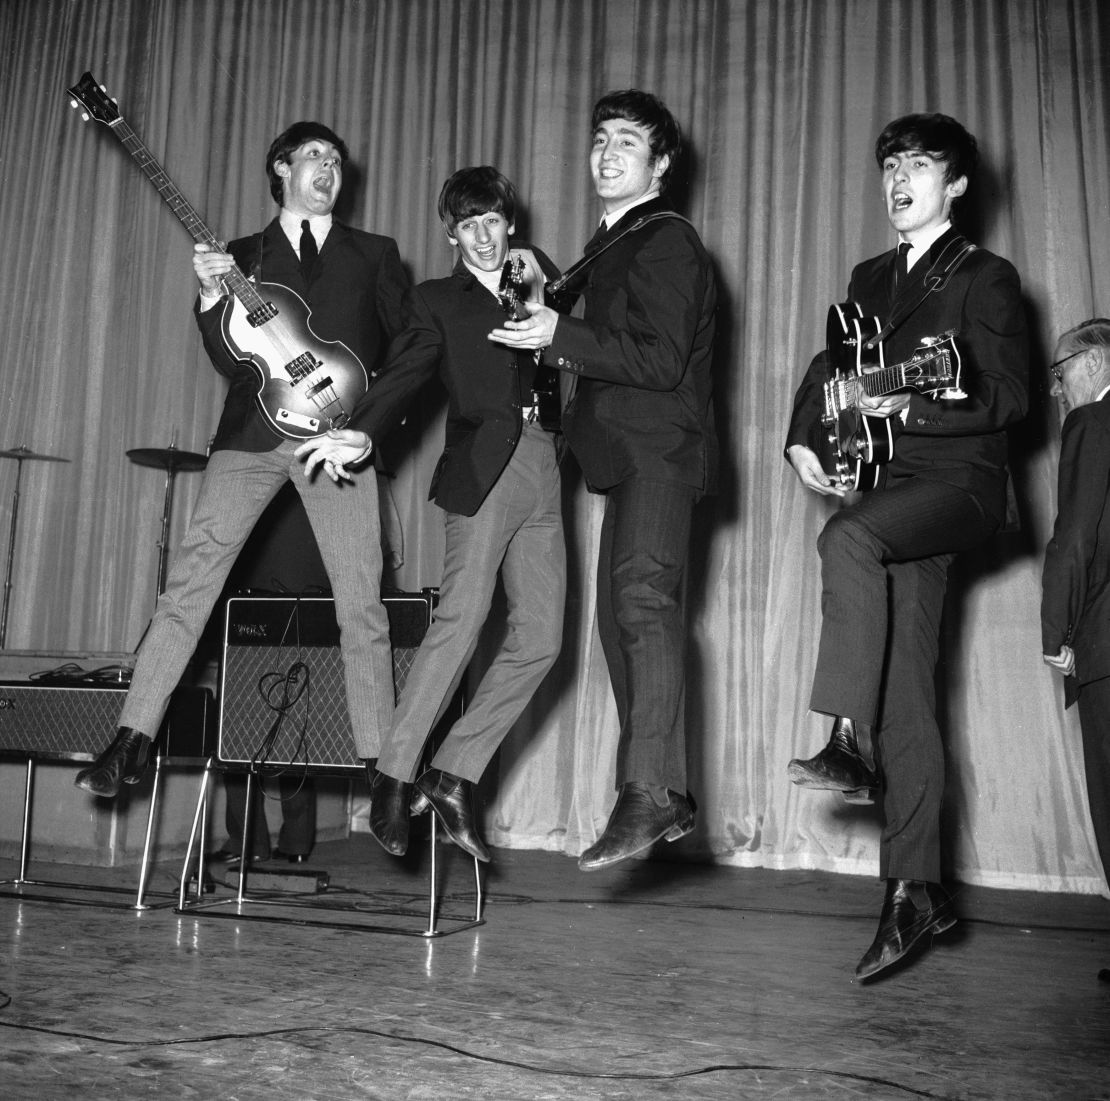 The Beatles' energy and cleverness made them favorites on the BBC.